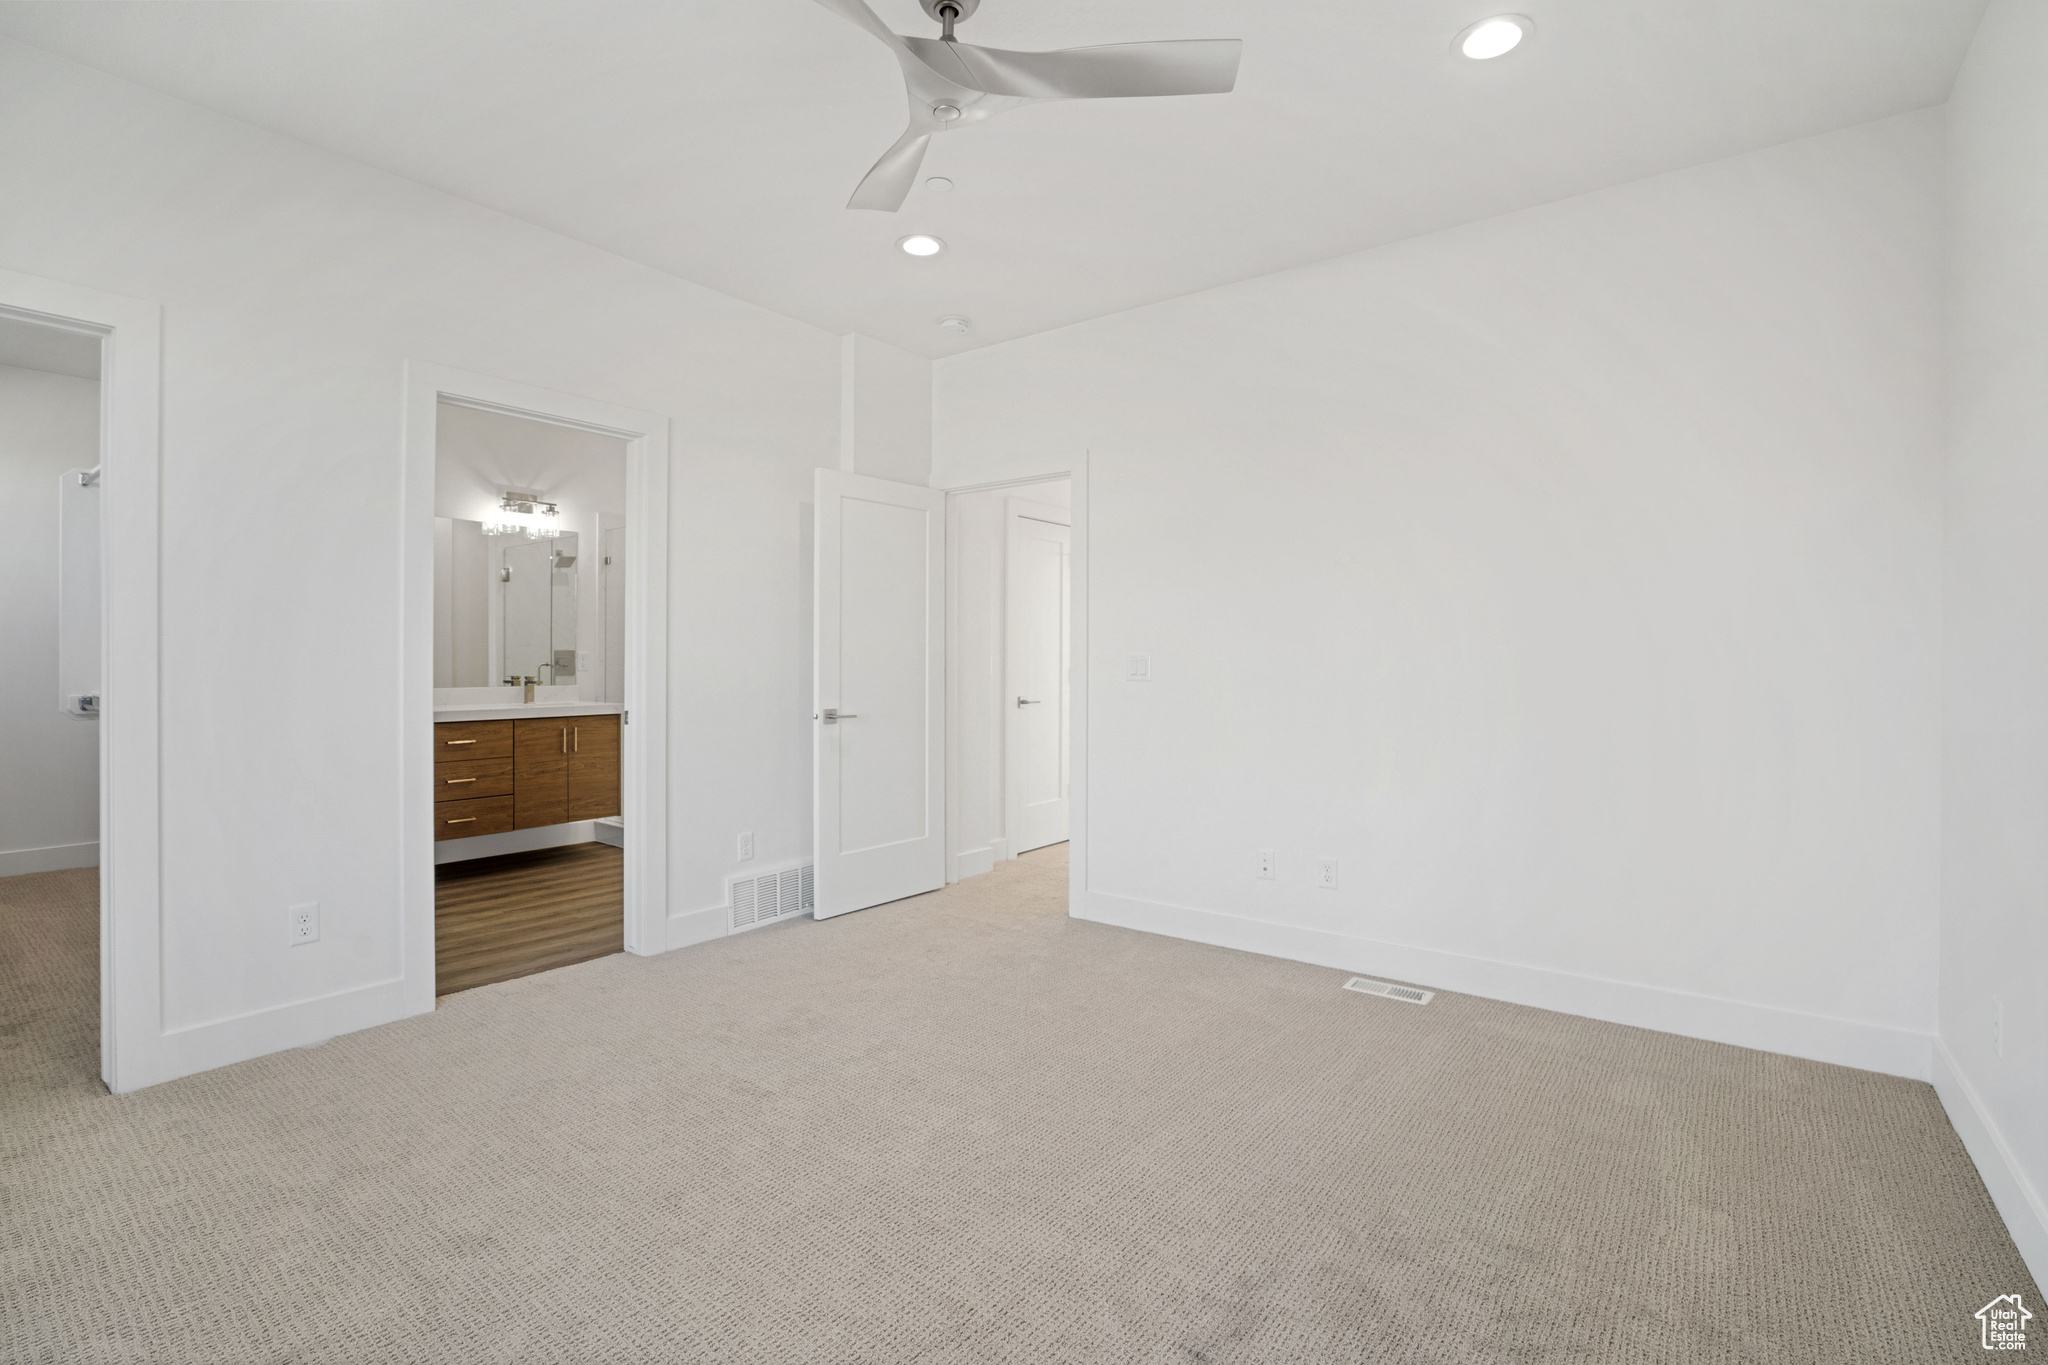 Unfurnished bedroom with light carpet, ceiling fan, and ensuite bath